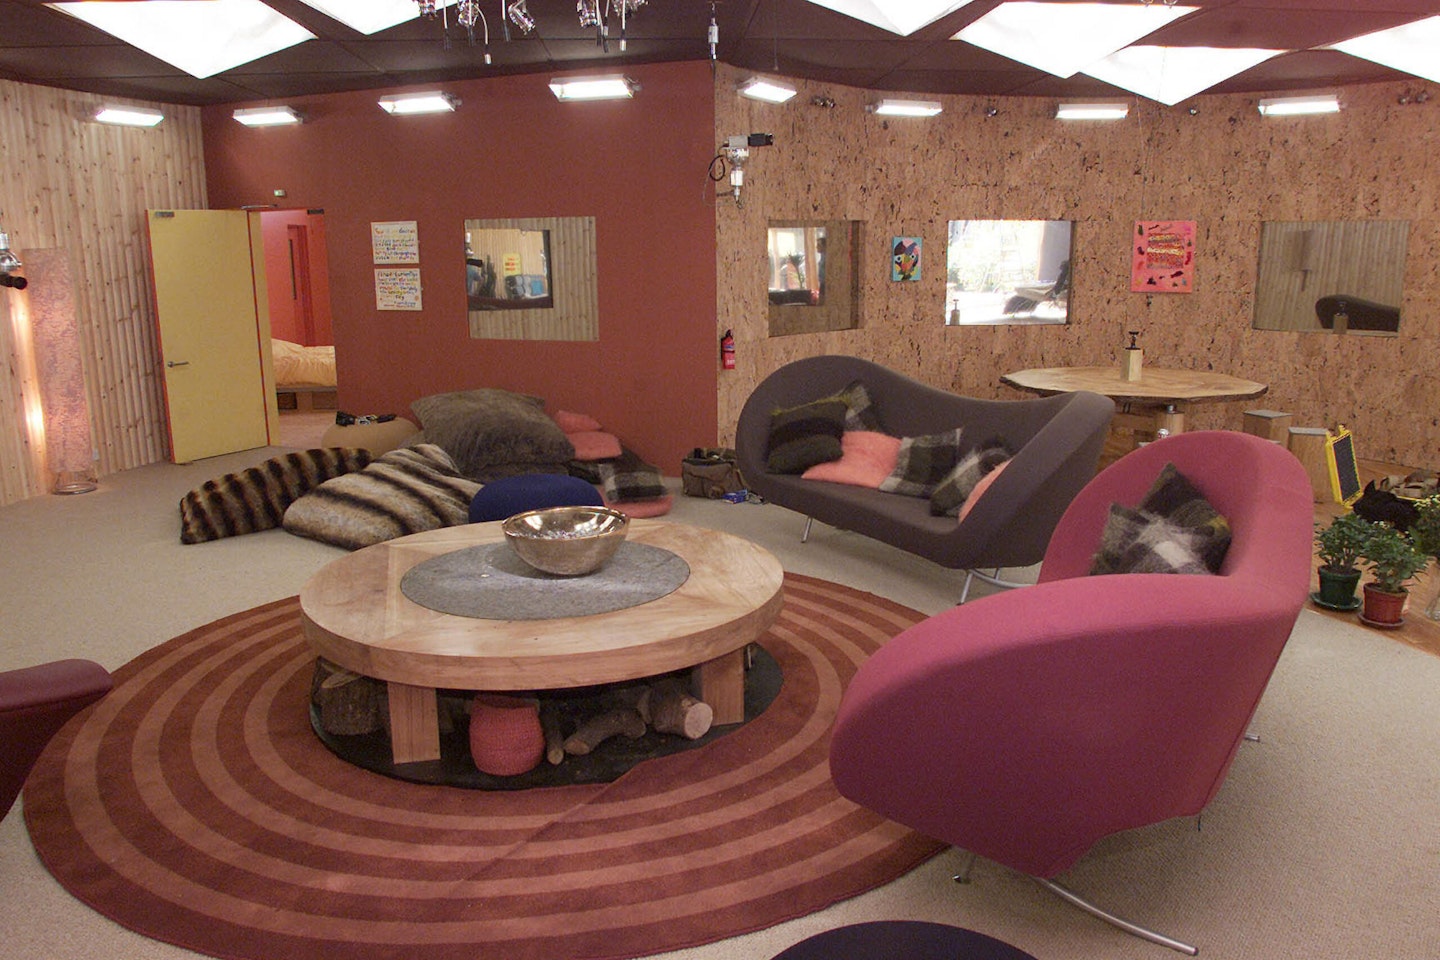 The Big Brother house in 2001